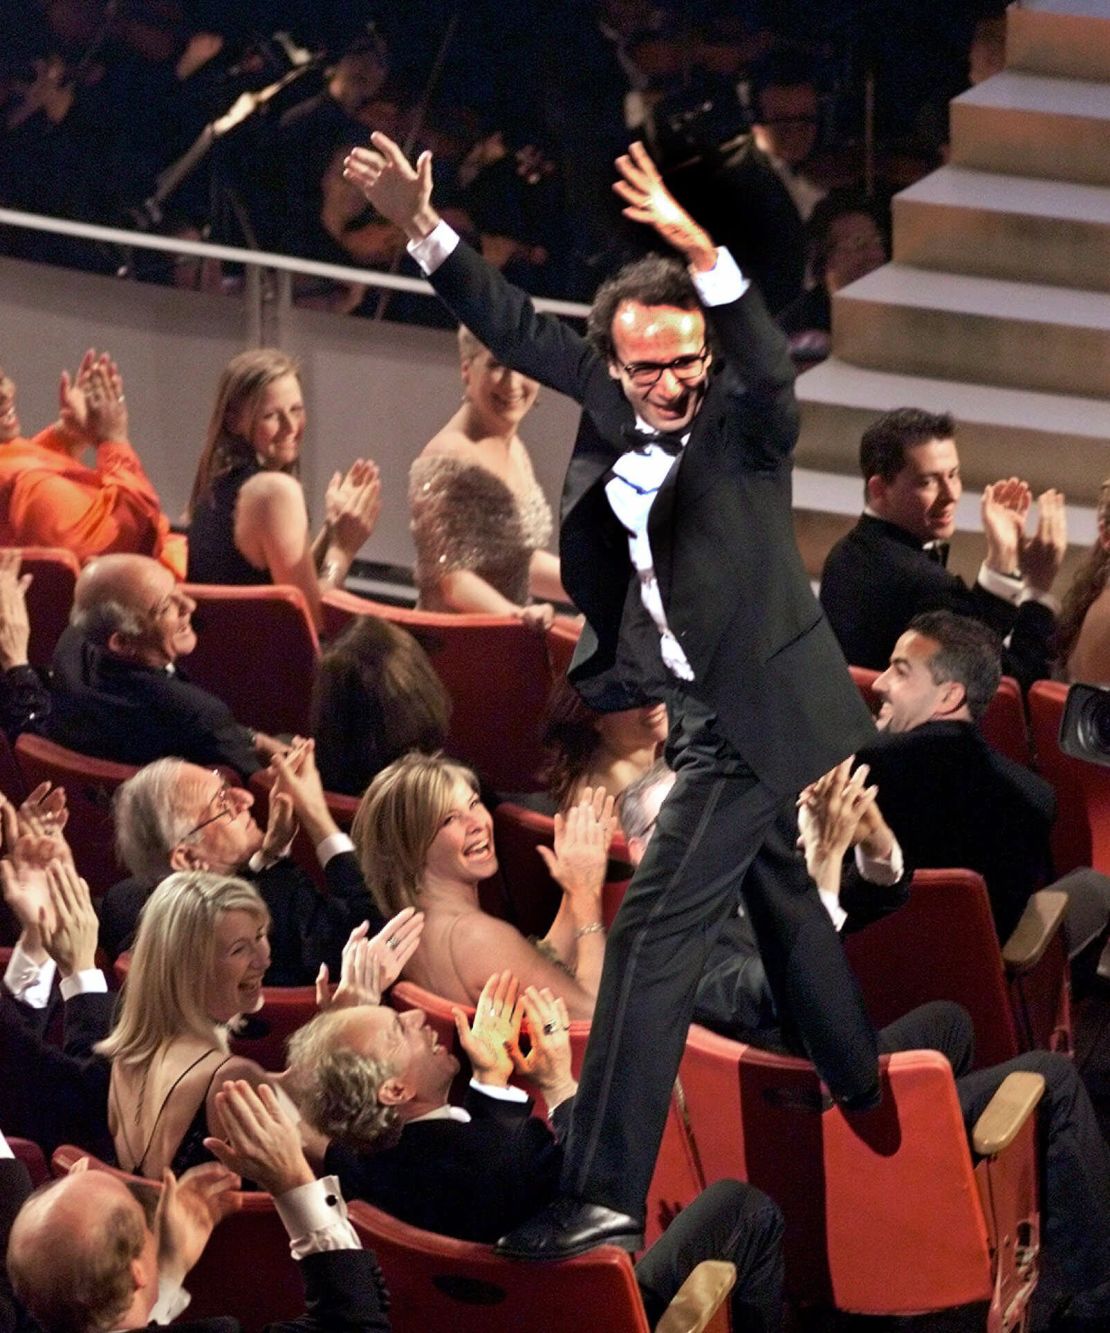 Director and actor Roberto Benigni jumps on the back of some chairs in excitement after winning the Oscar for best foreign language film for "Life is Beautiful" at the Oscars in 1999.